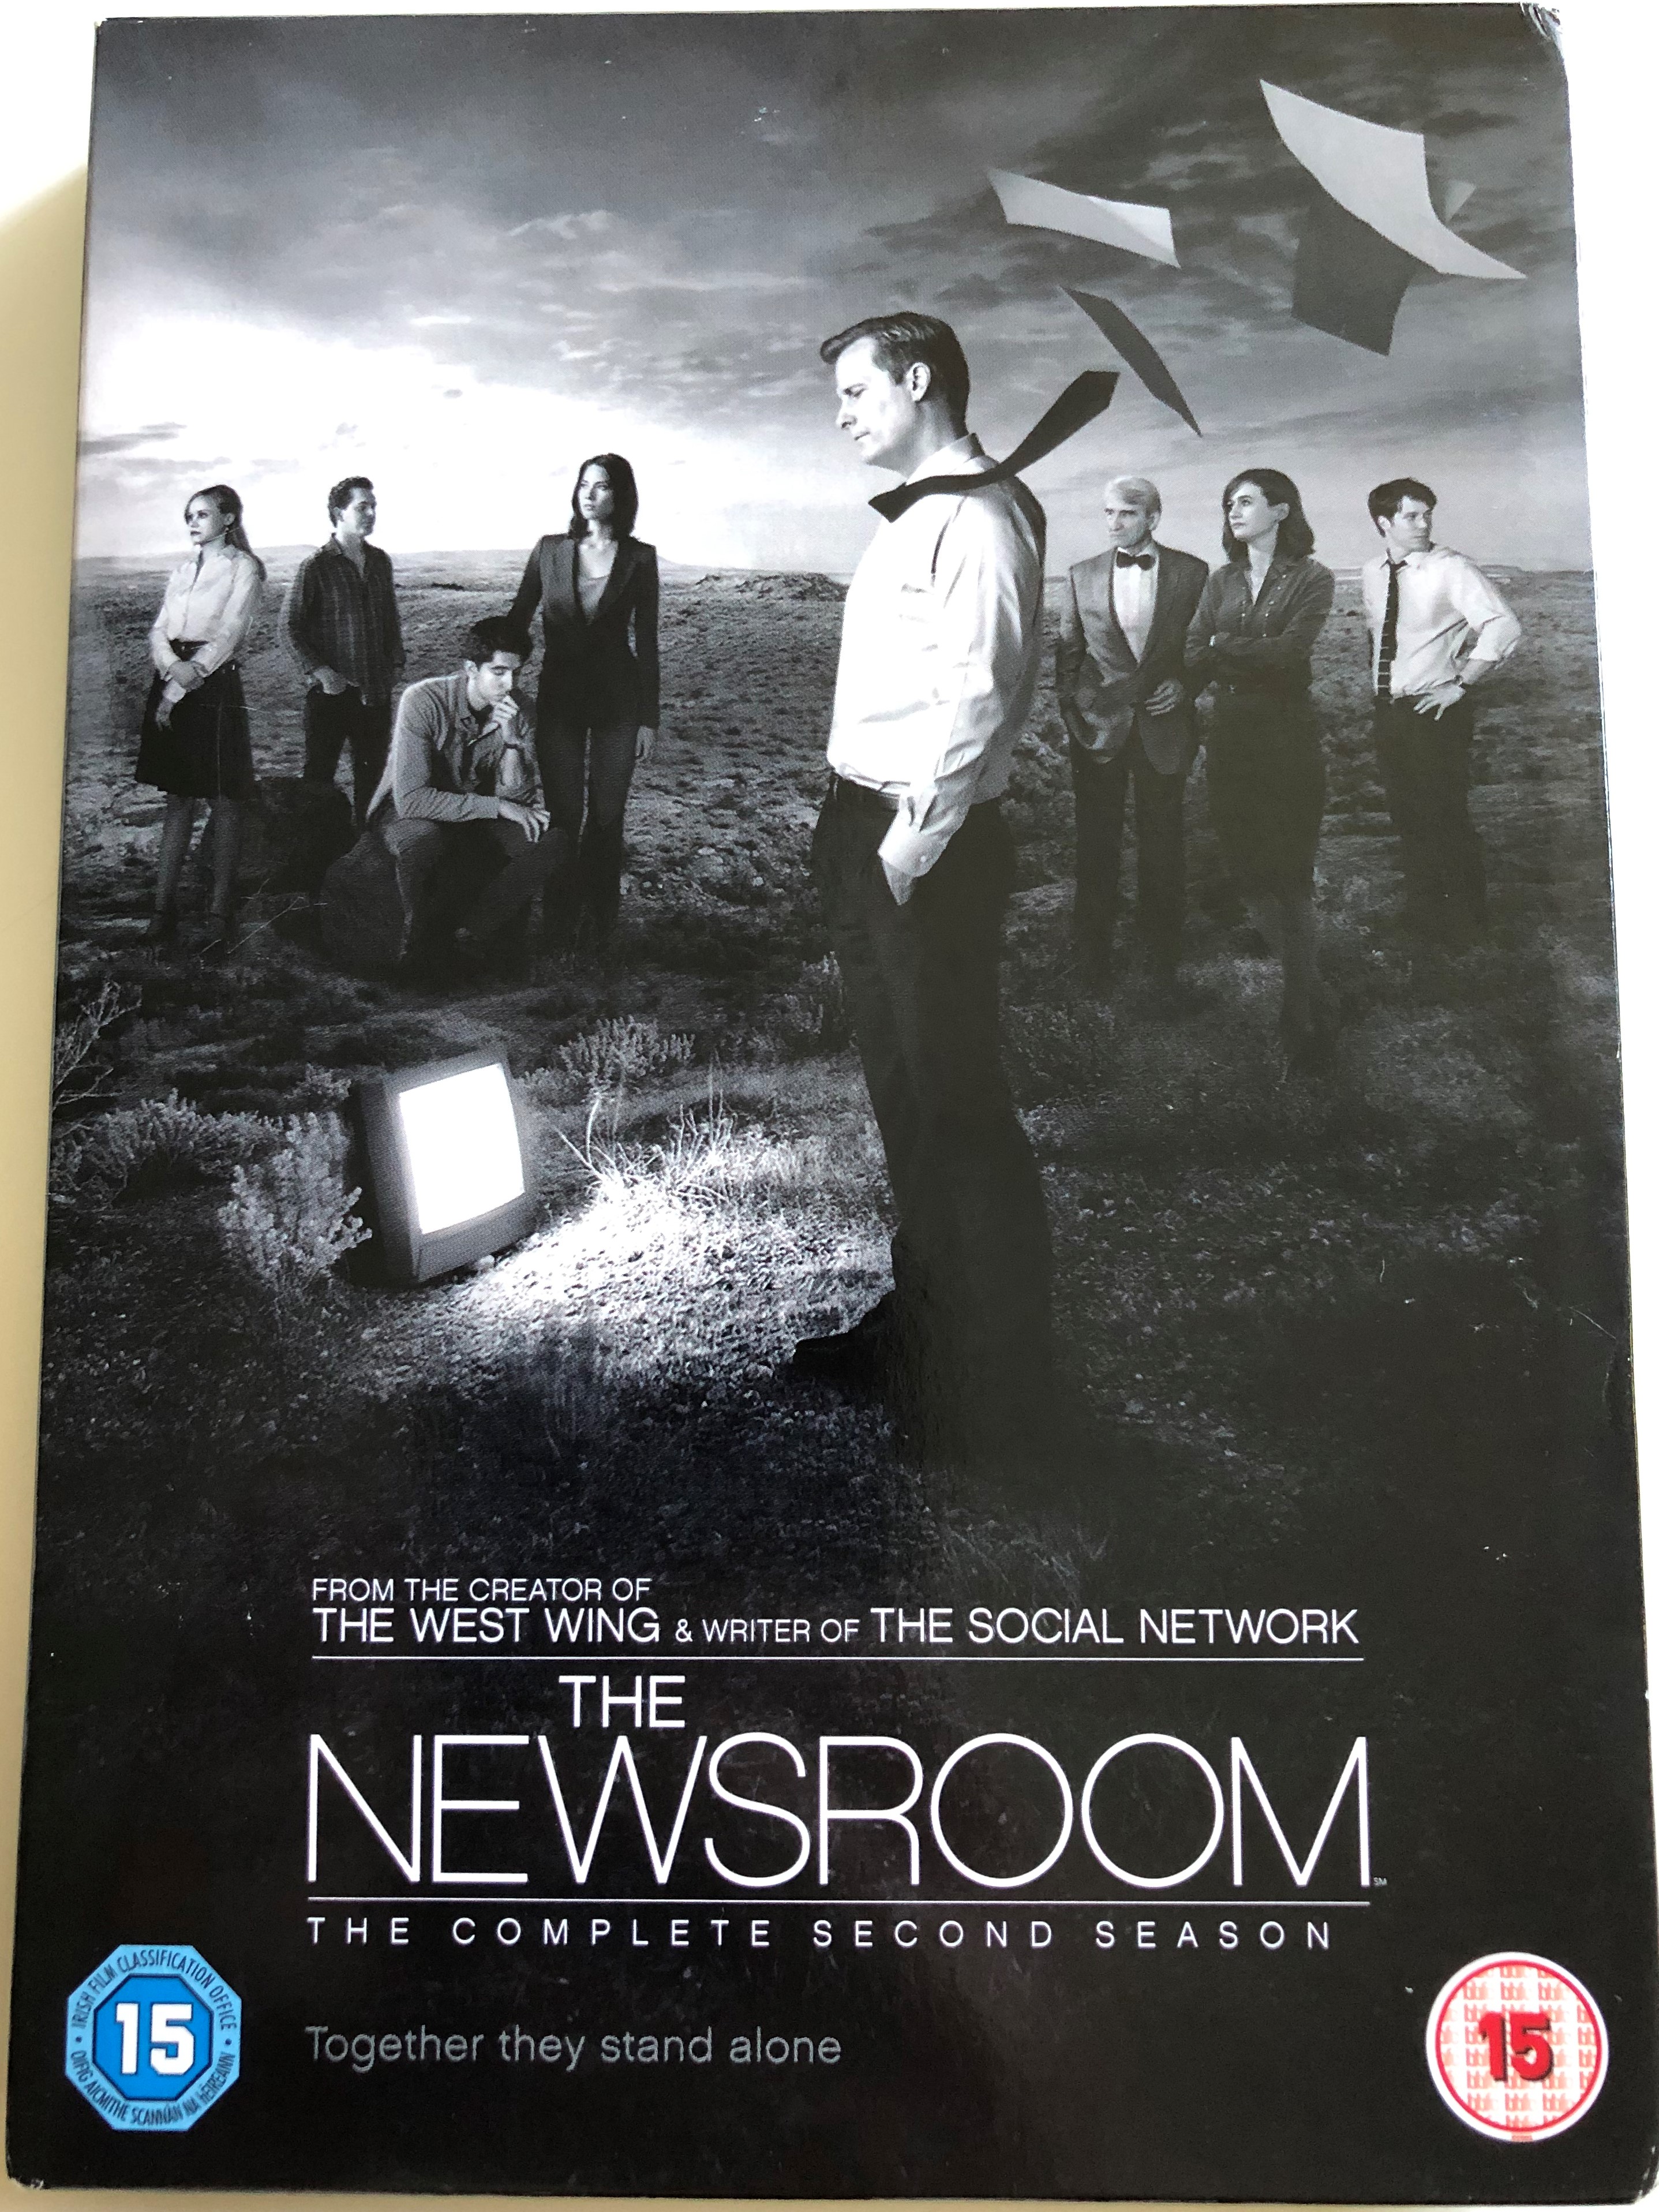 the-newsroom-dvd-2014-the-complete-second-season-created-by-aaron-sorkin-a-hbo-original-series-together-the-stand-alone-1-.jpg